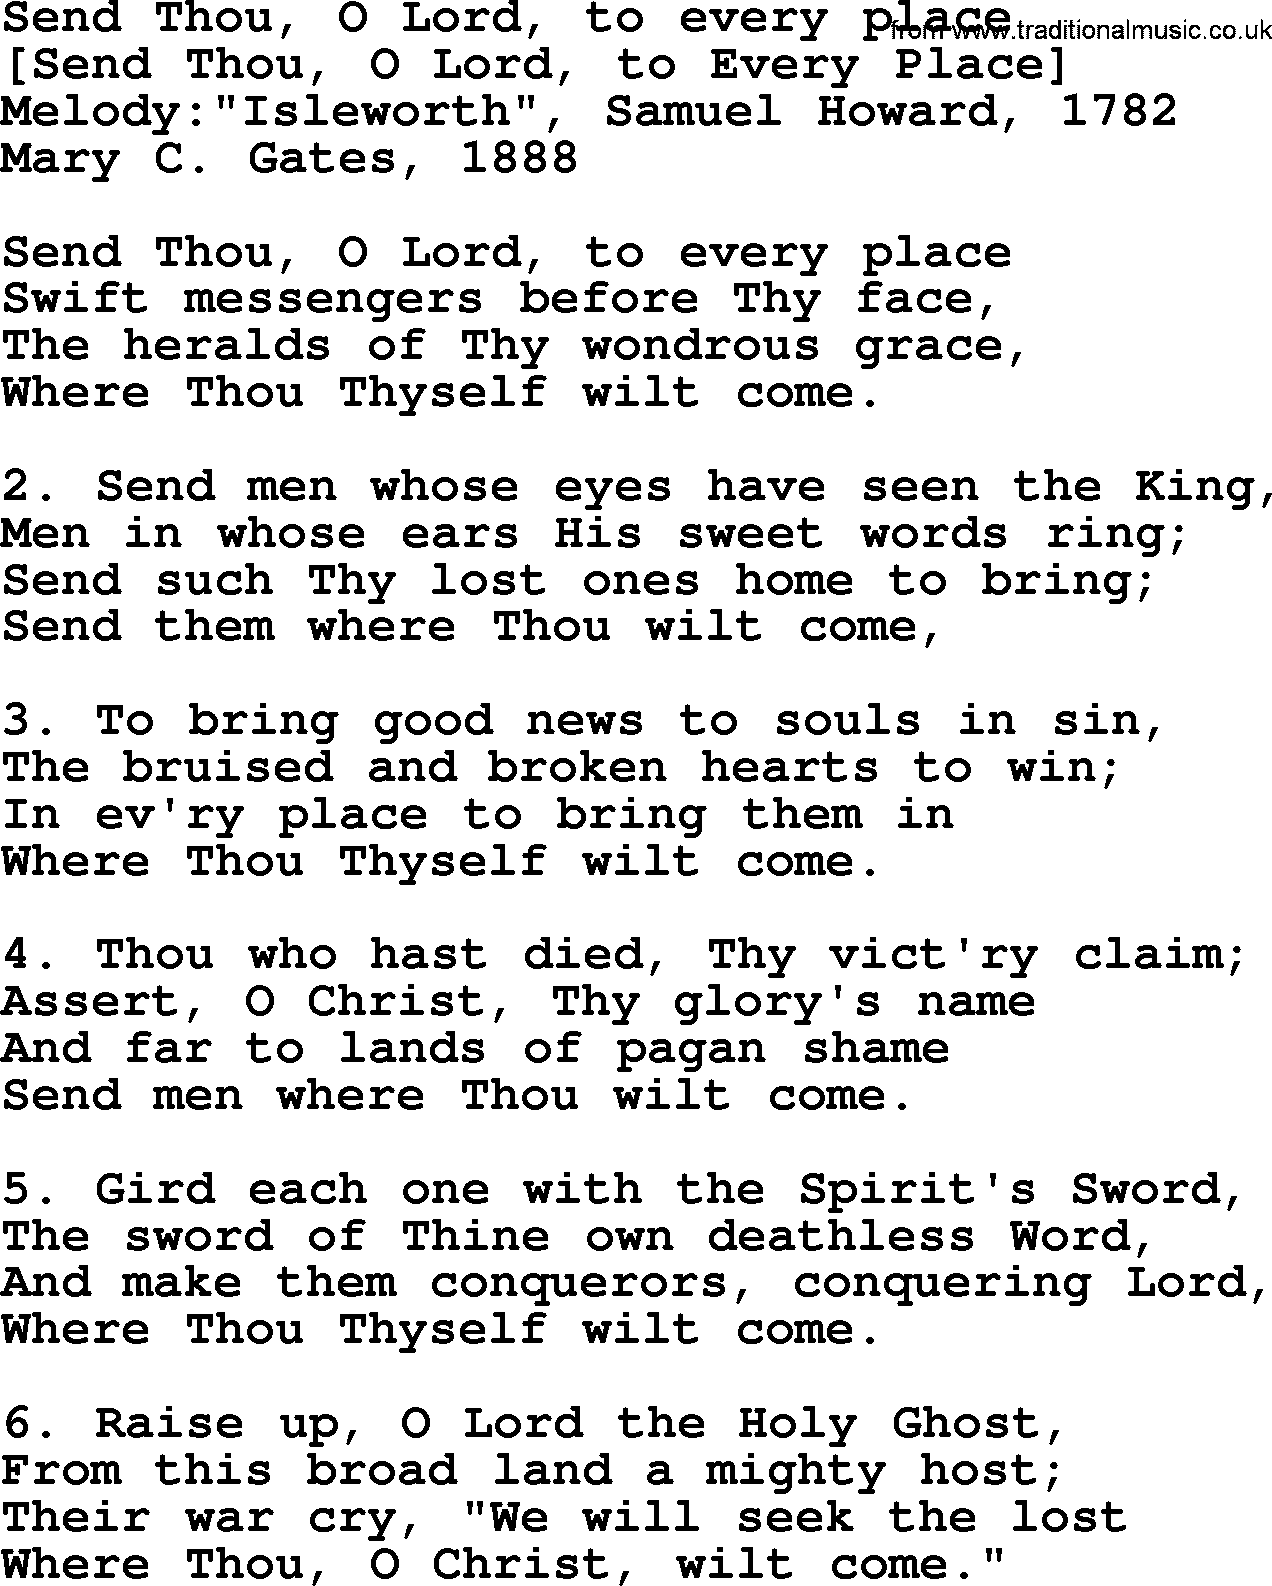 Old American Song: Send Thou, O Lord, To Every Place, lyrics